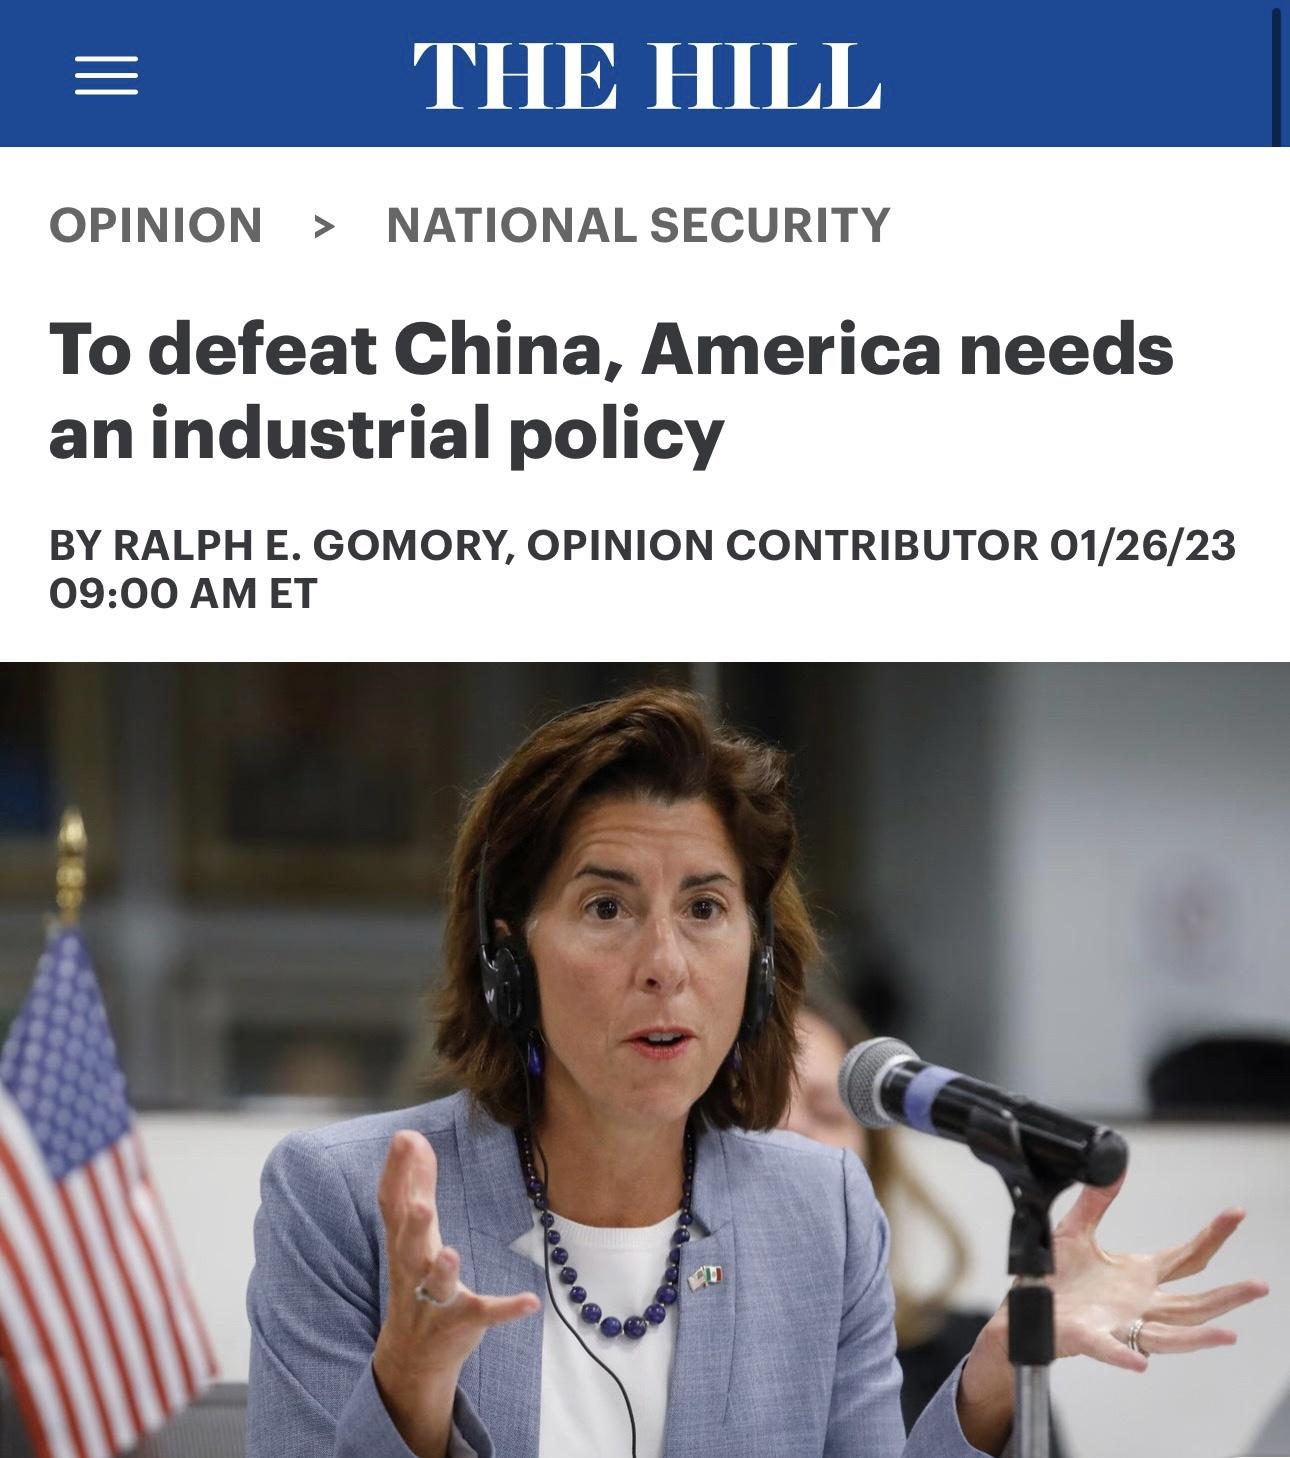 Because the battle on fright was to the 2000-2020 period, so ‘defeating China’ will be to the next Twenty years